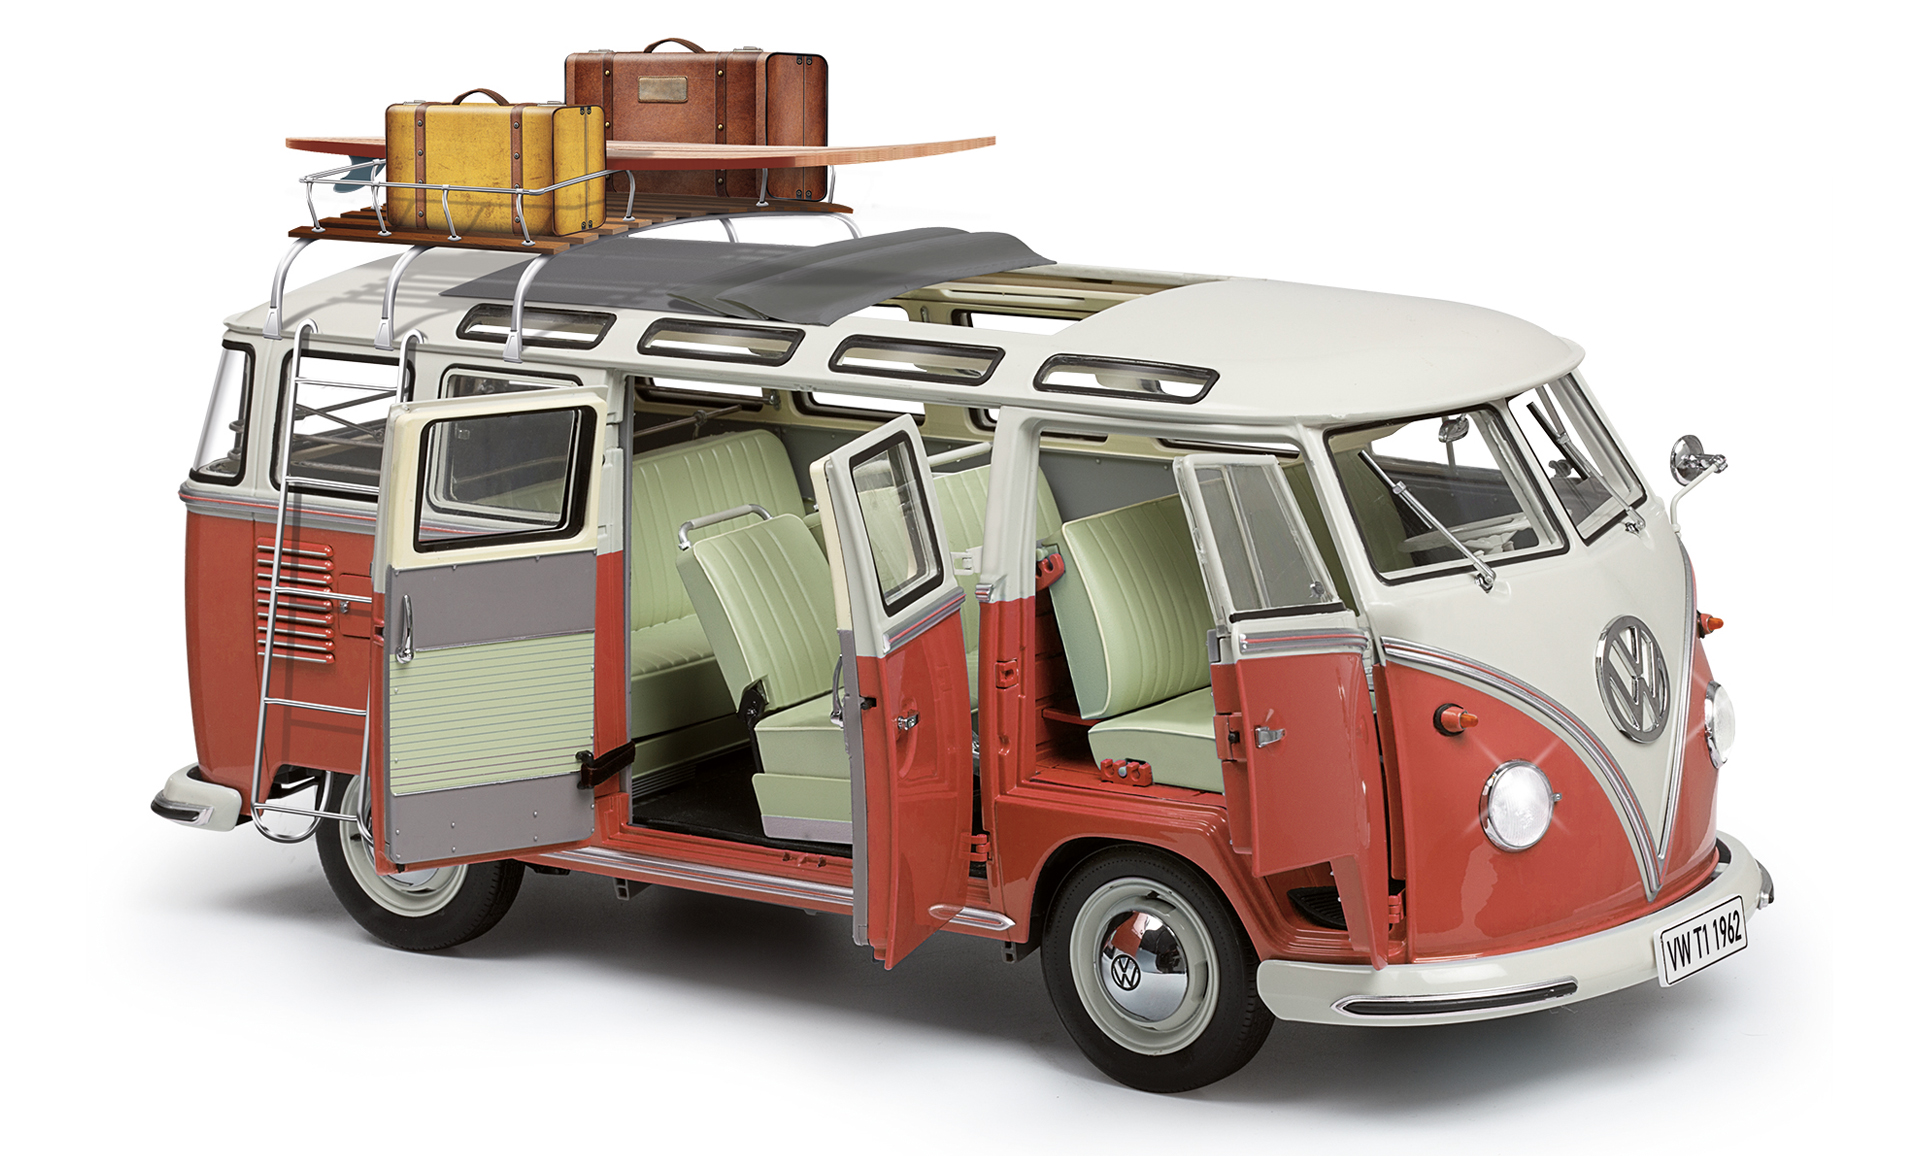 History of the VW Microbus